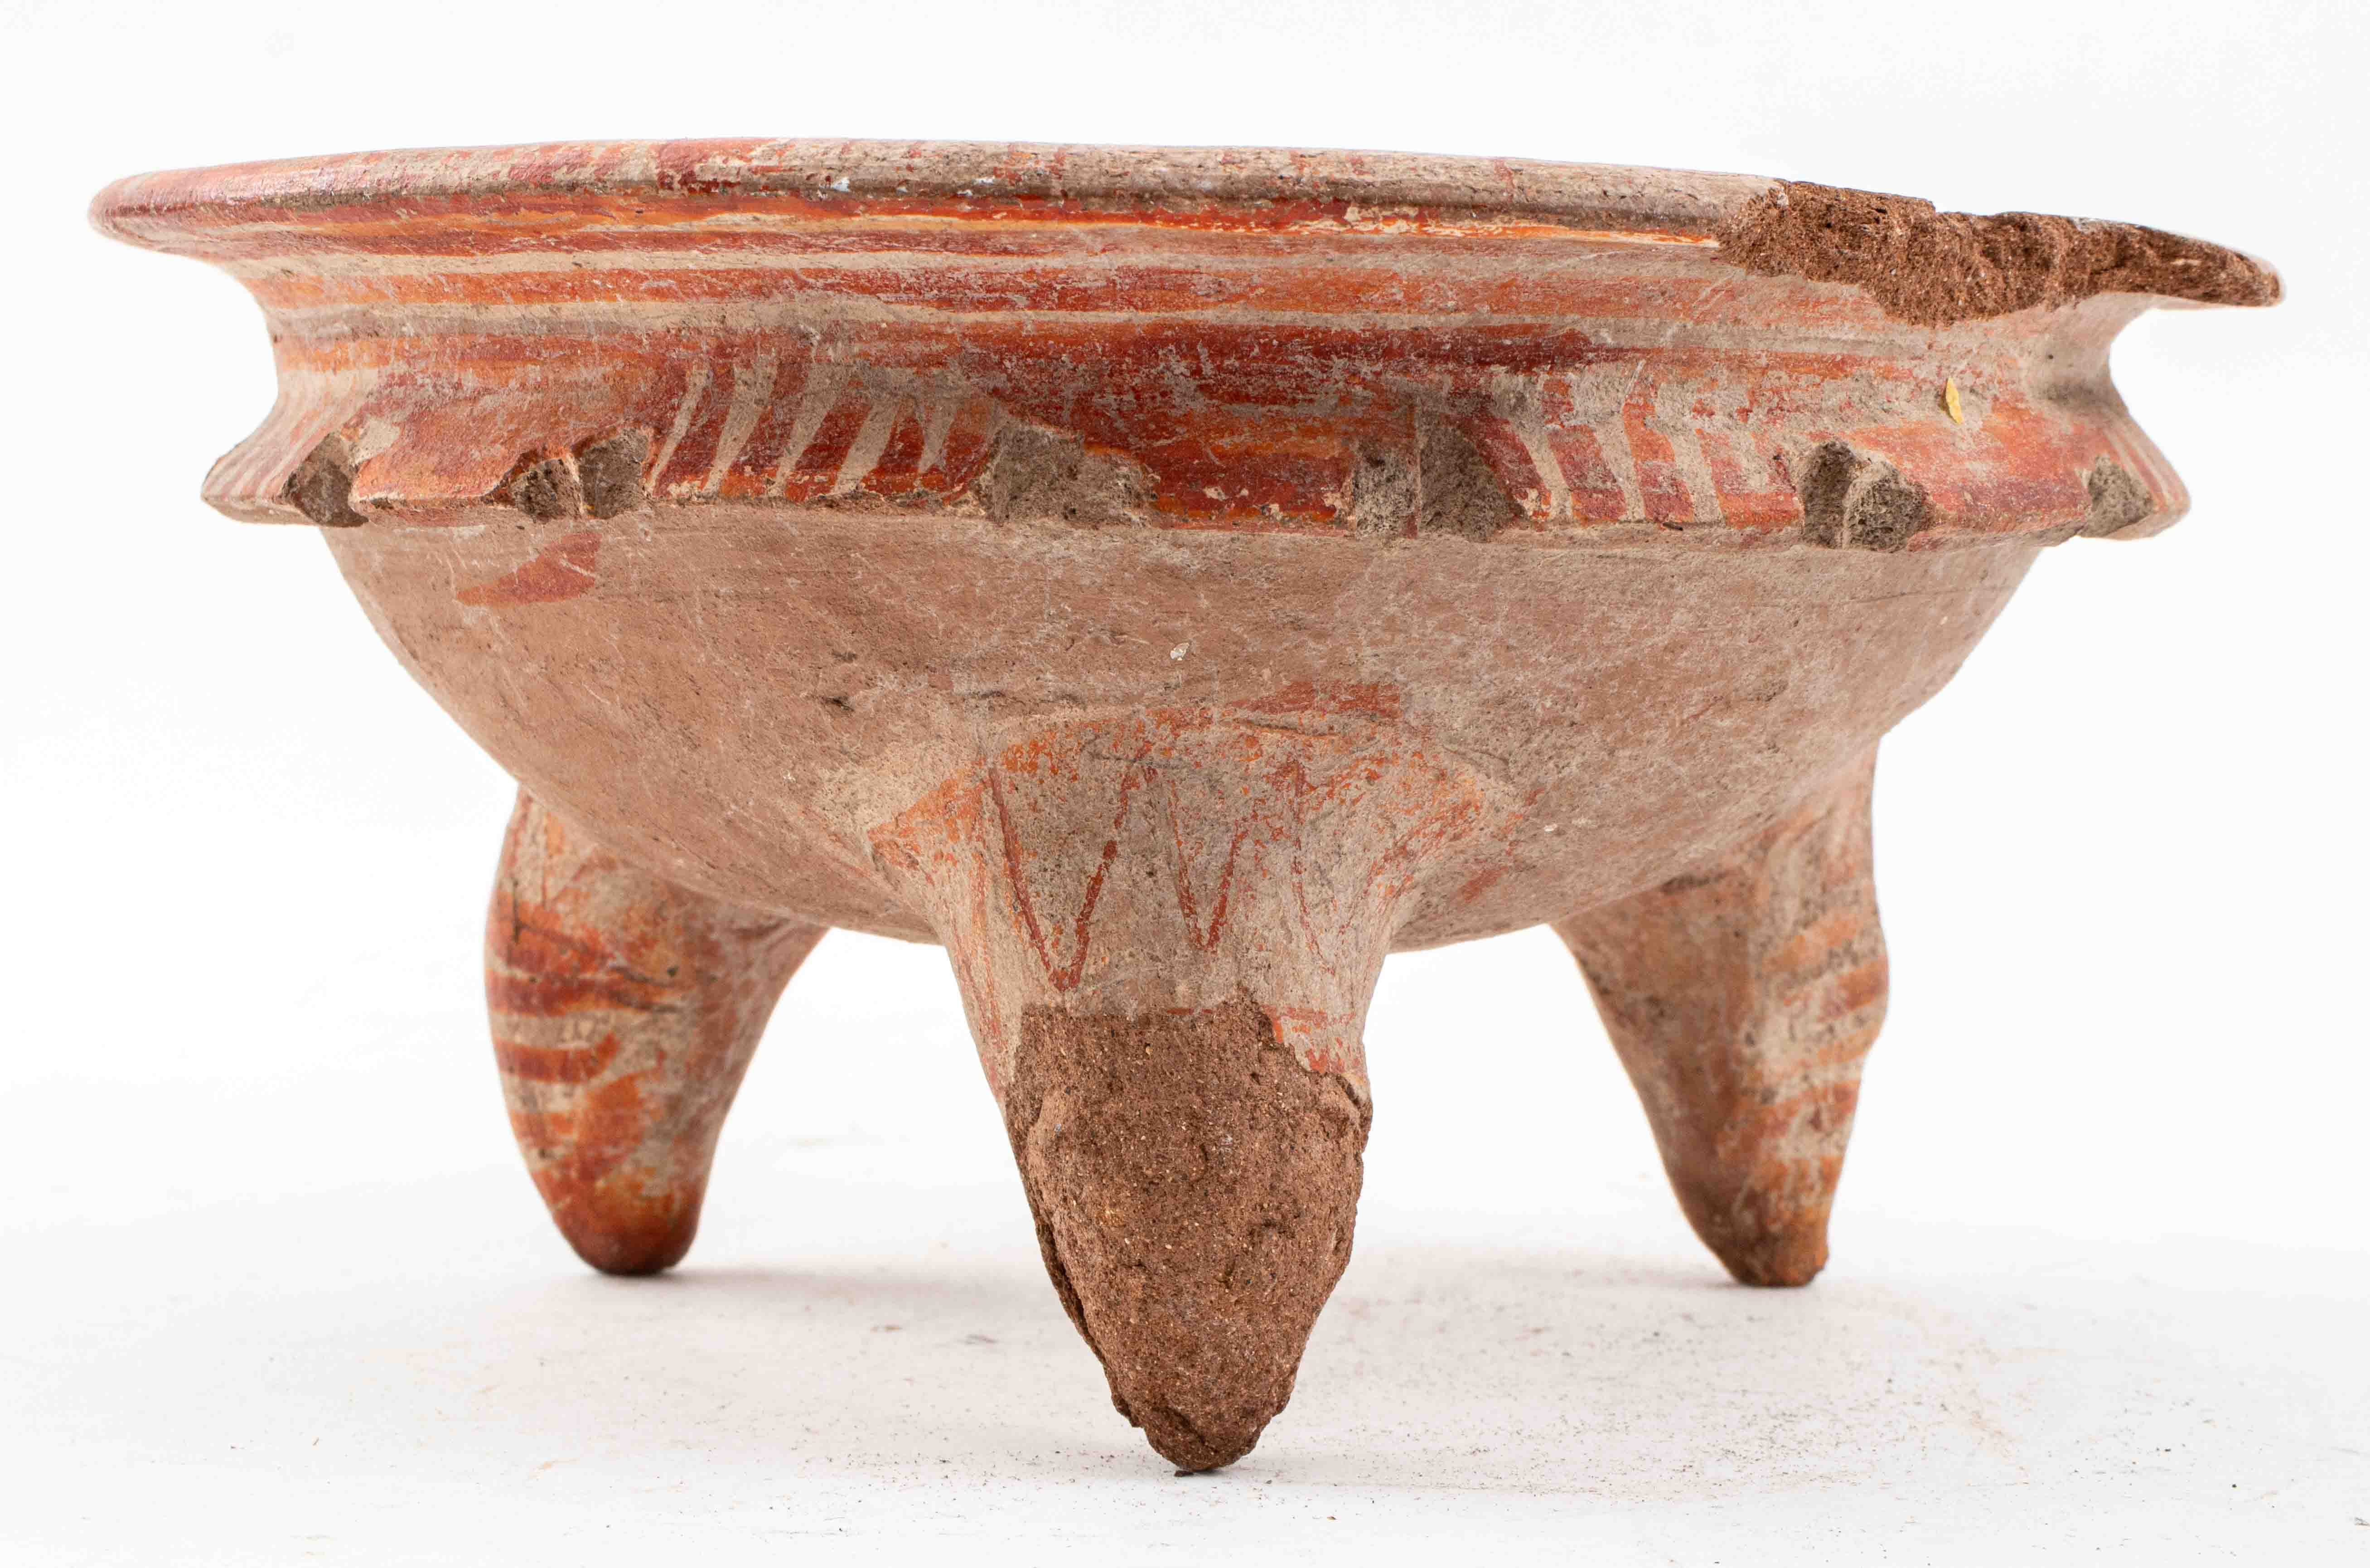 PRE-COLUMBIAN CERAMIC PAINTED FOOTED